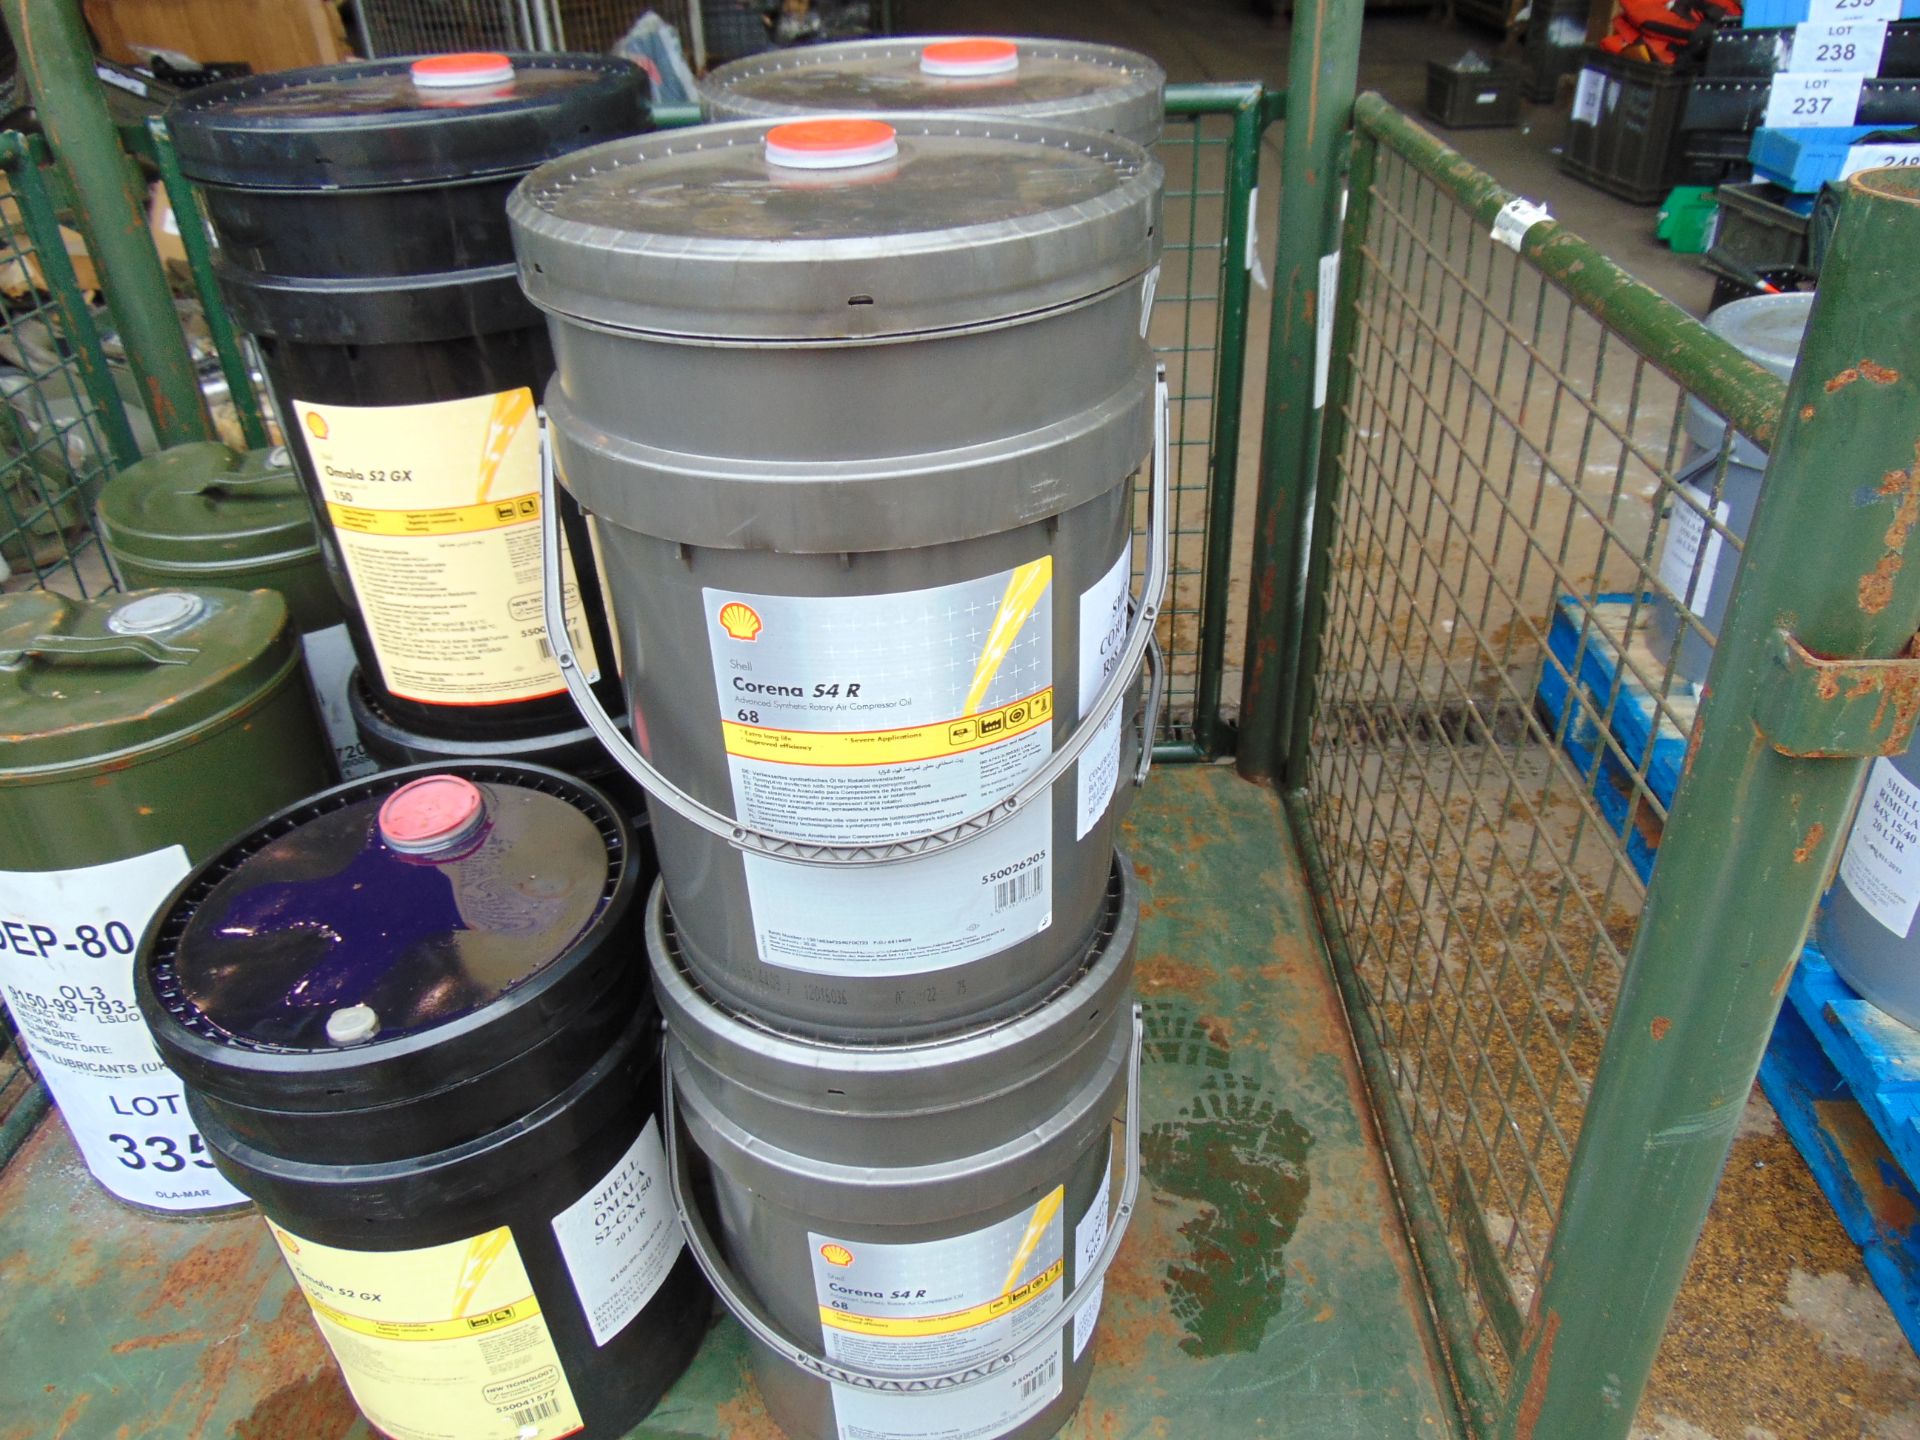 5 x 20 Litre Drums Shell Corena S4R 68, High Quality Lubricating oil New Unissued MoD Reserve Stocks - Image 3 of 3